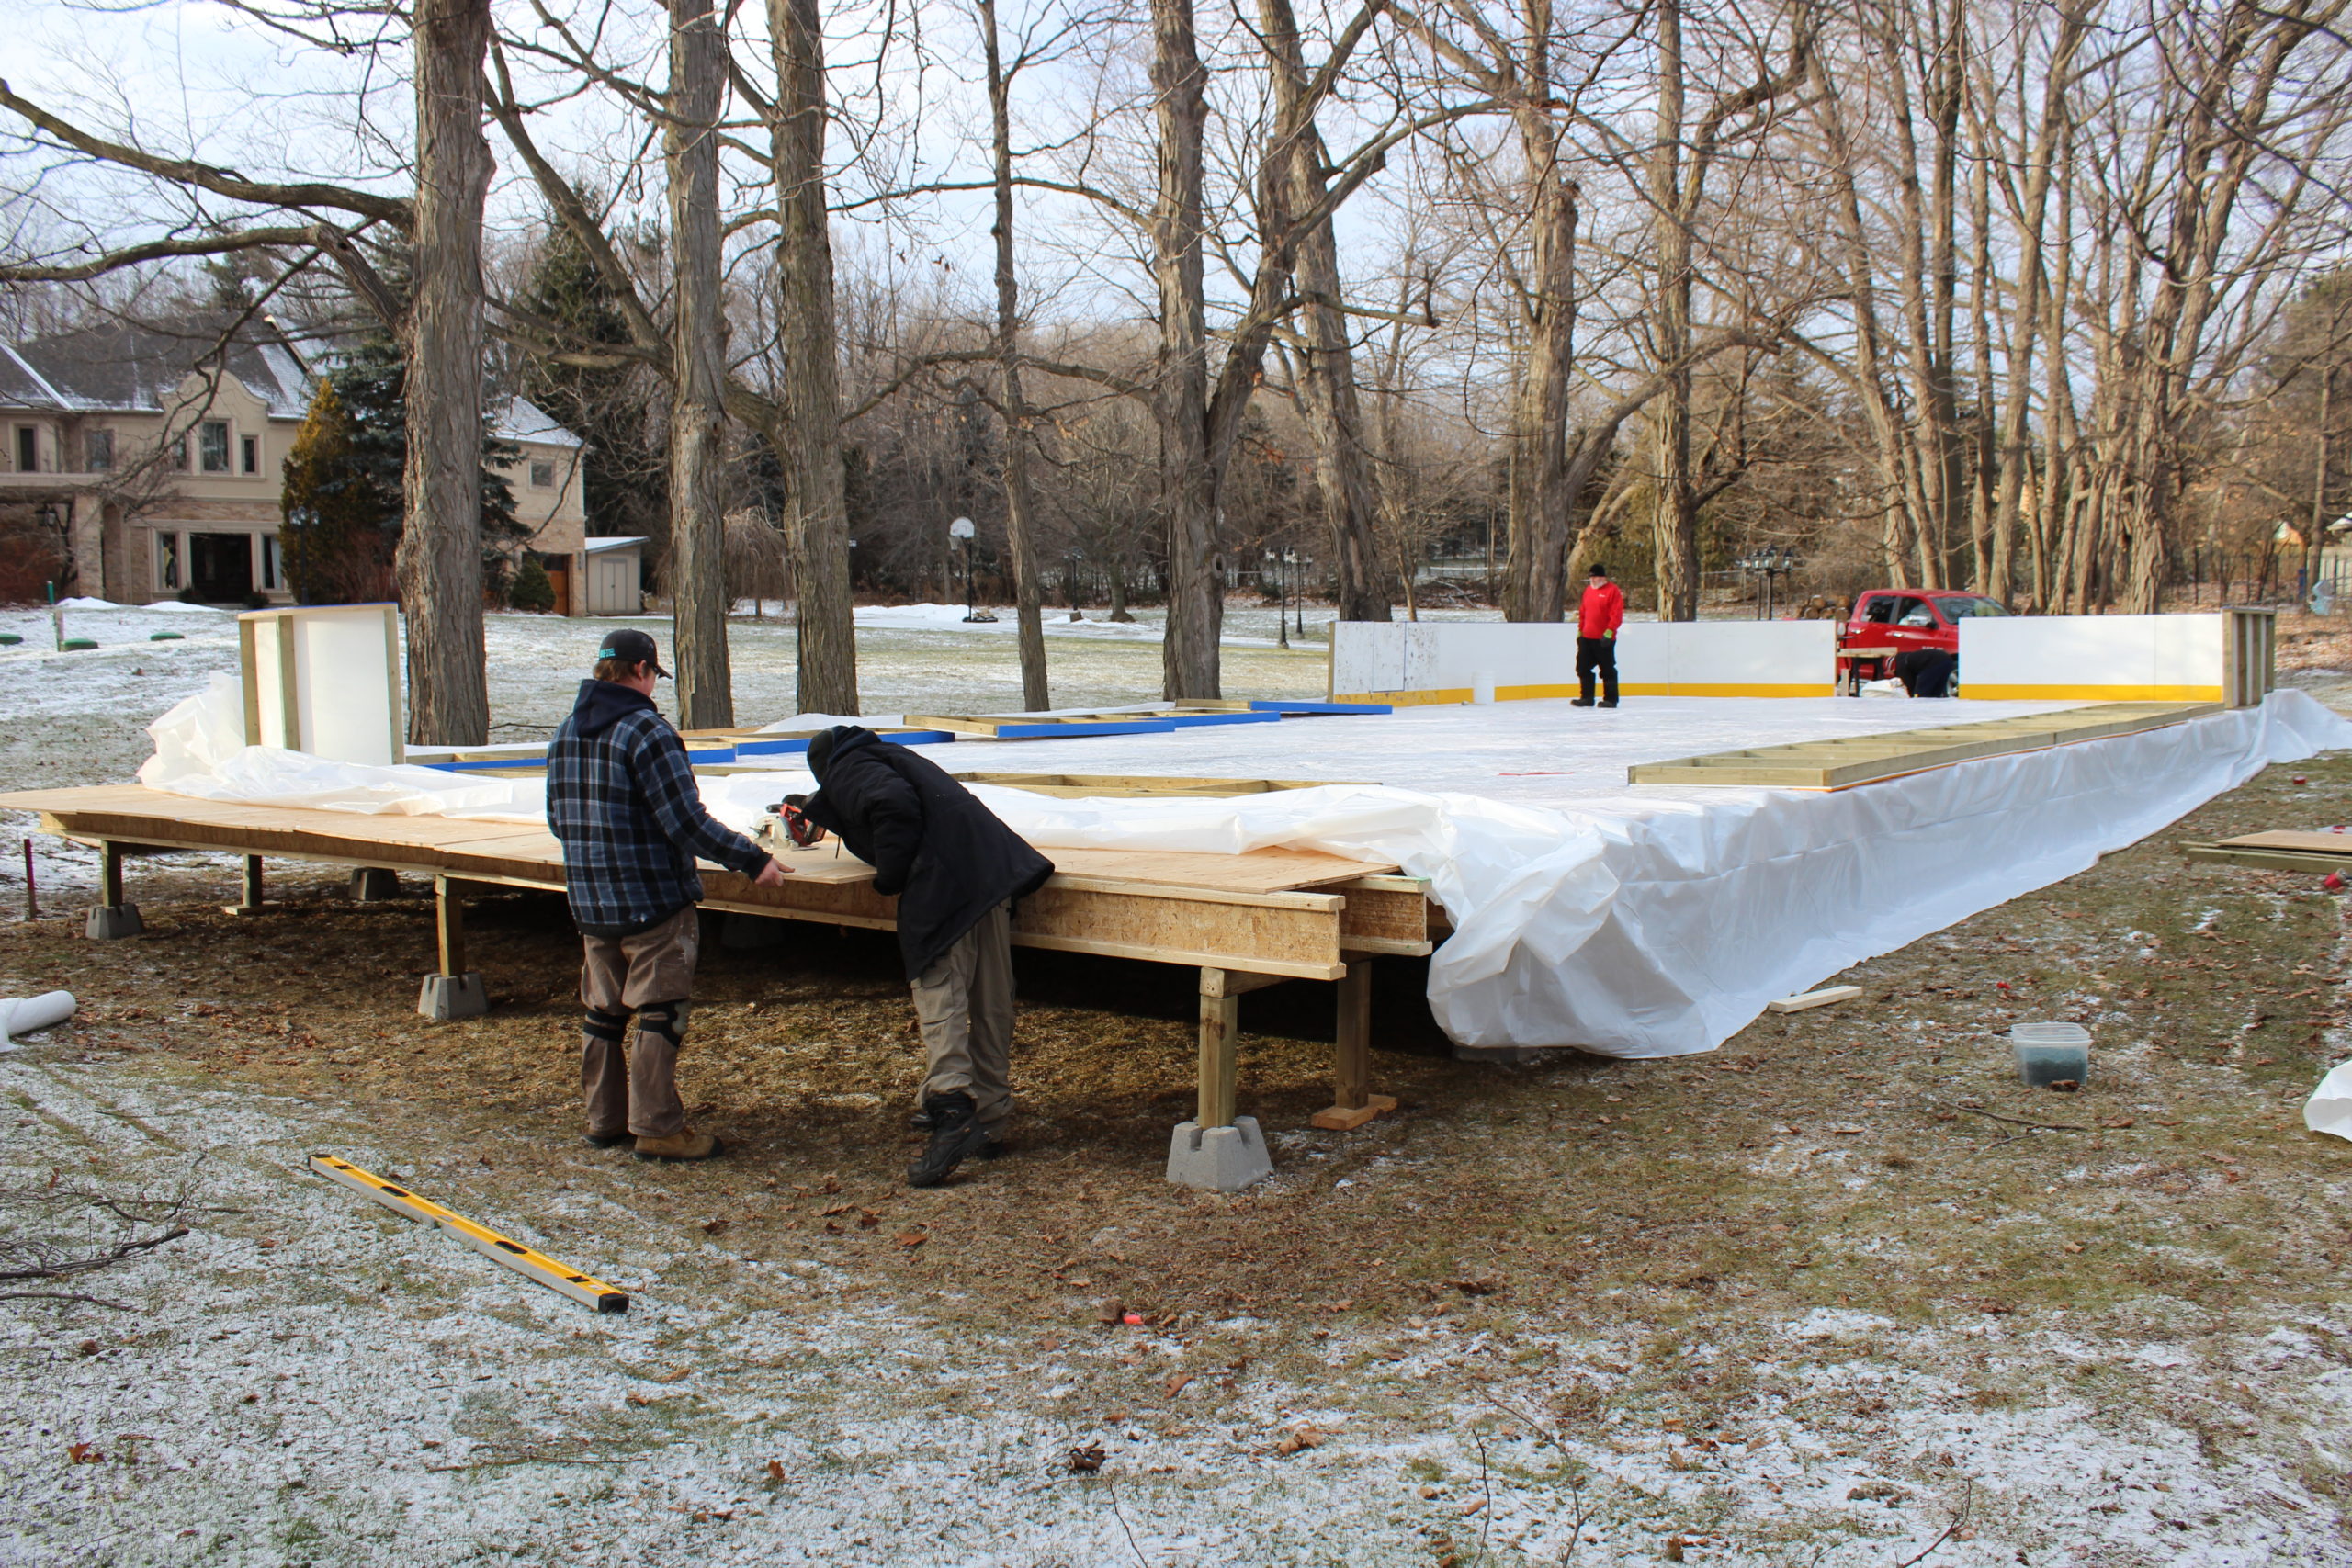 Portable ice rink with subfloor and dasher boards